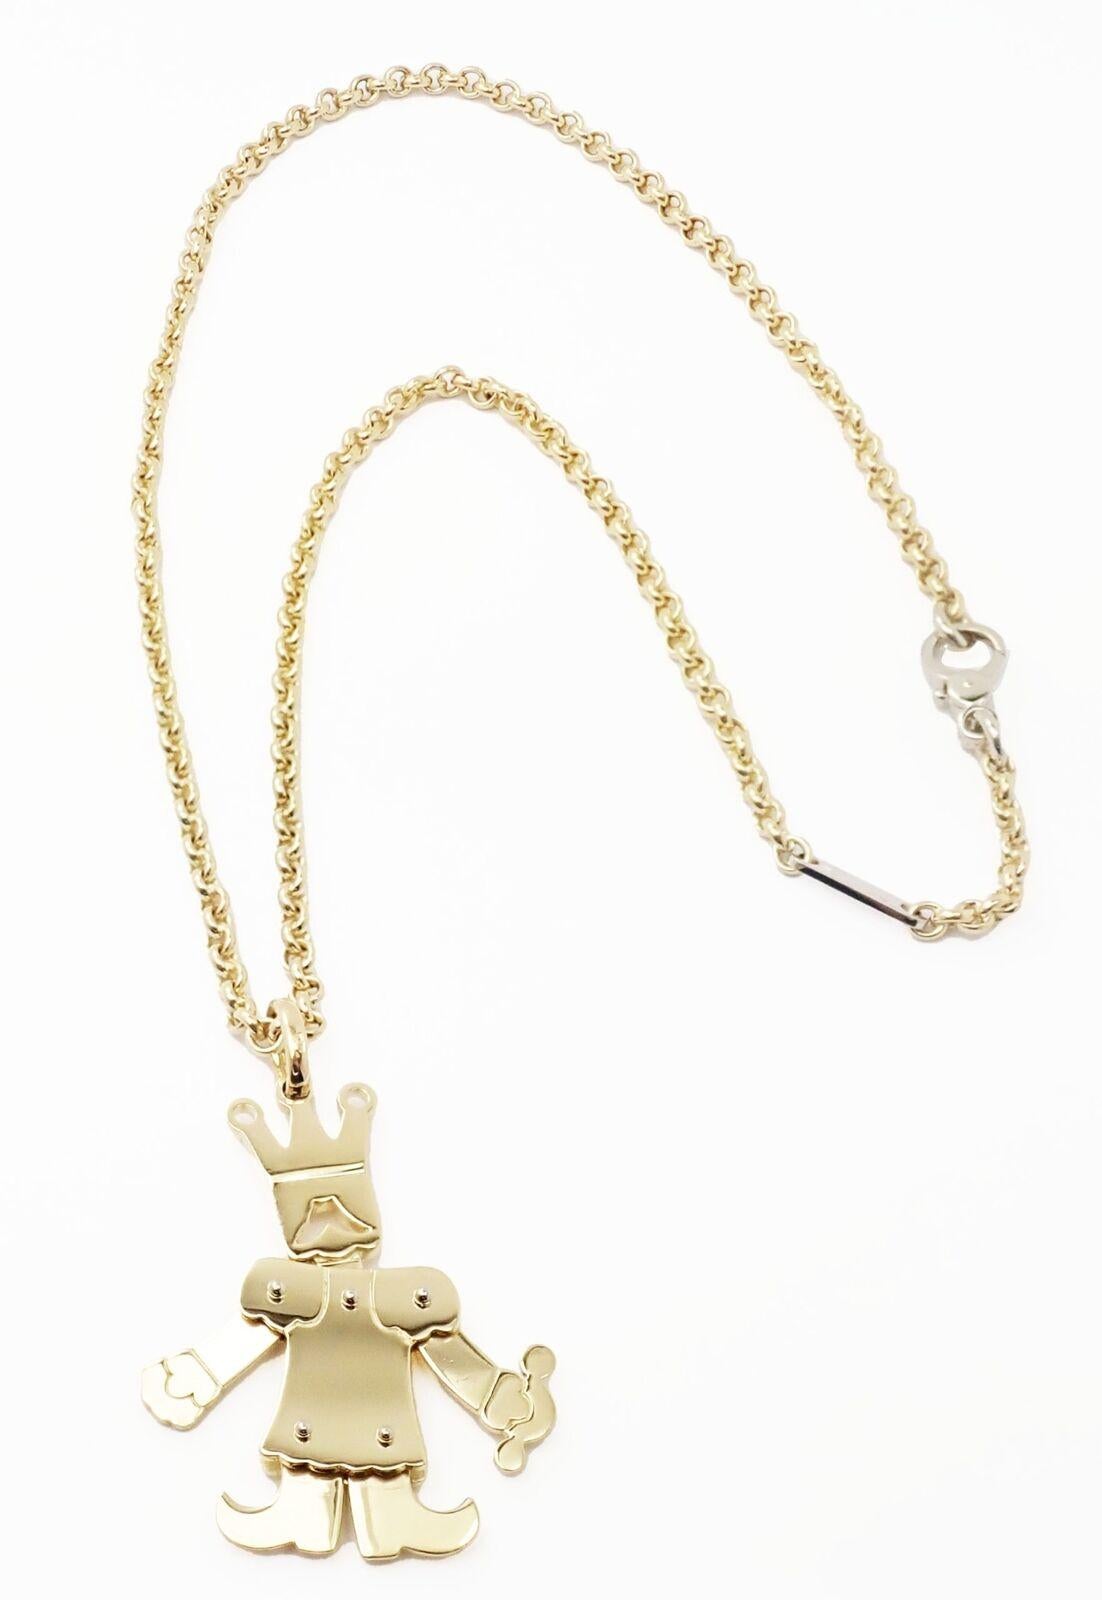 18k Yellow Gold Animated King Extra Large Pendant Necklace by Pomellato. 
The King pendant's arms, legs and head swing from the body giving the pendant natural movement when being worn. This piece is vintage, circa 1980's. 
Details: 
Weight: 52.5